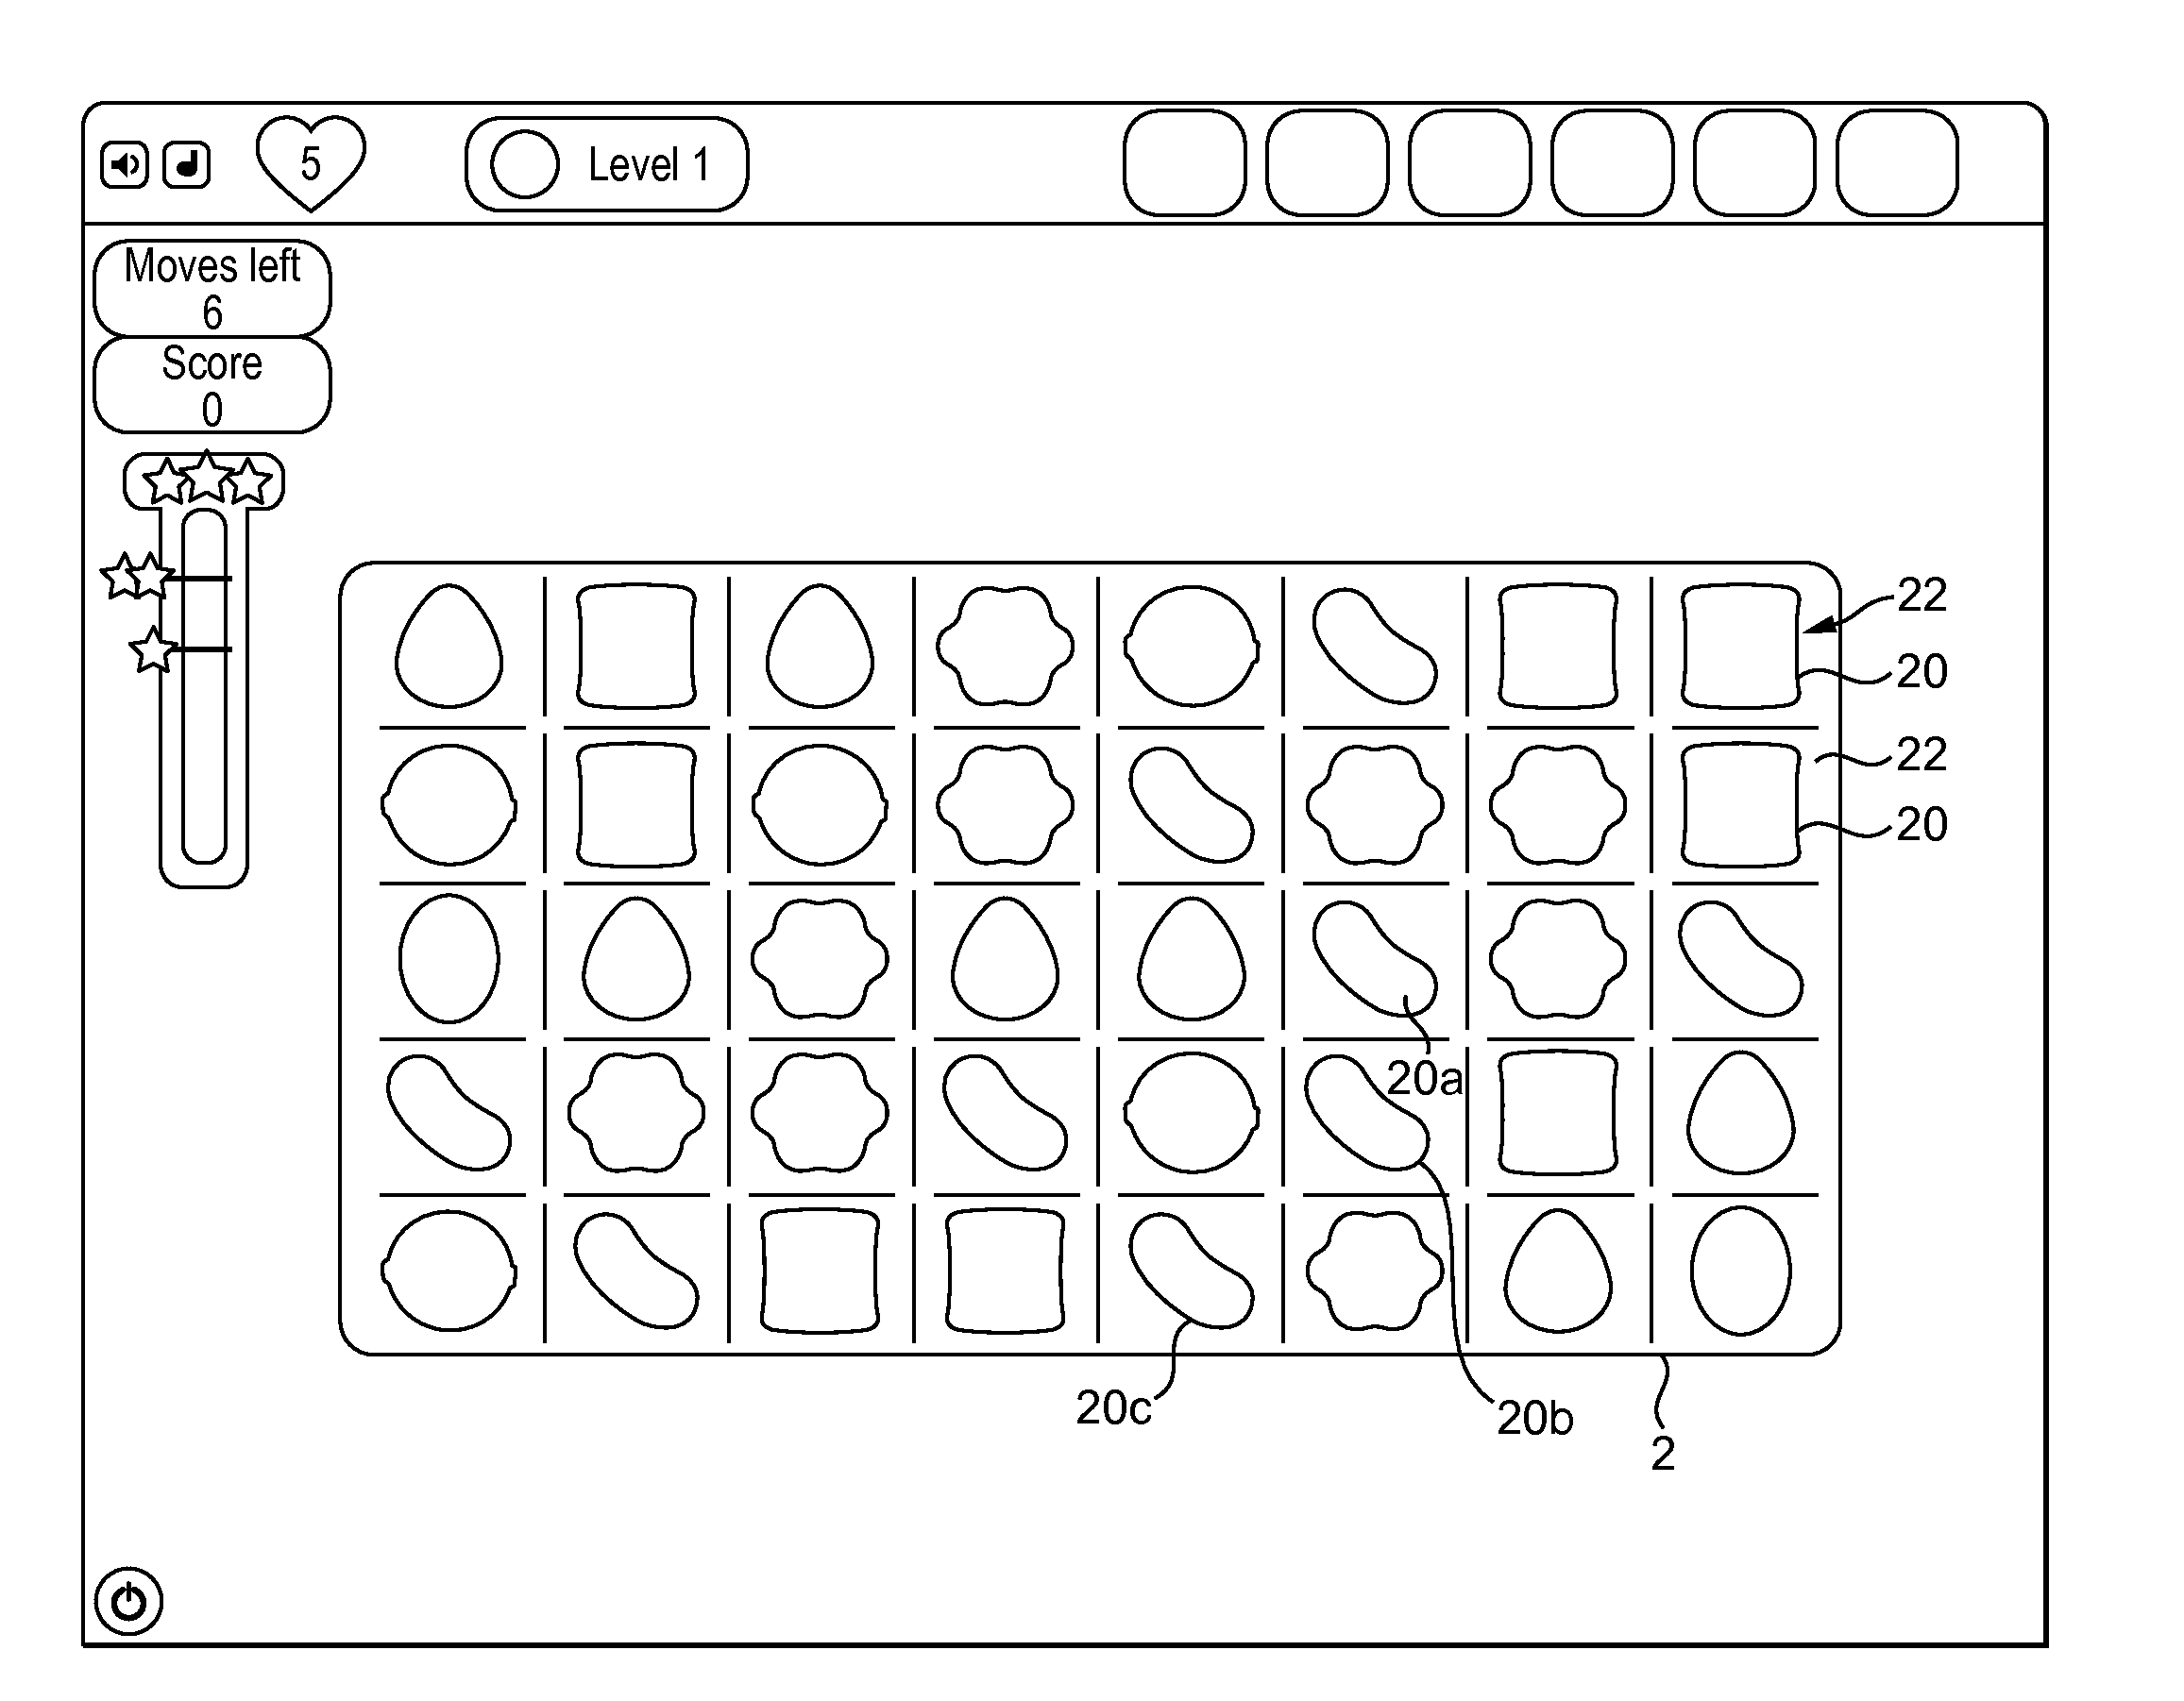 Controlling a user interface of a computer device